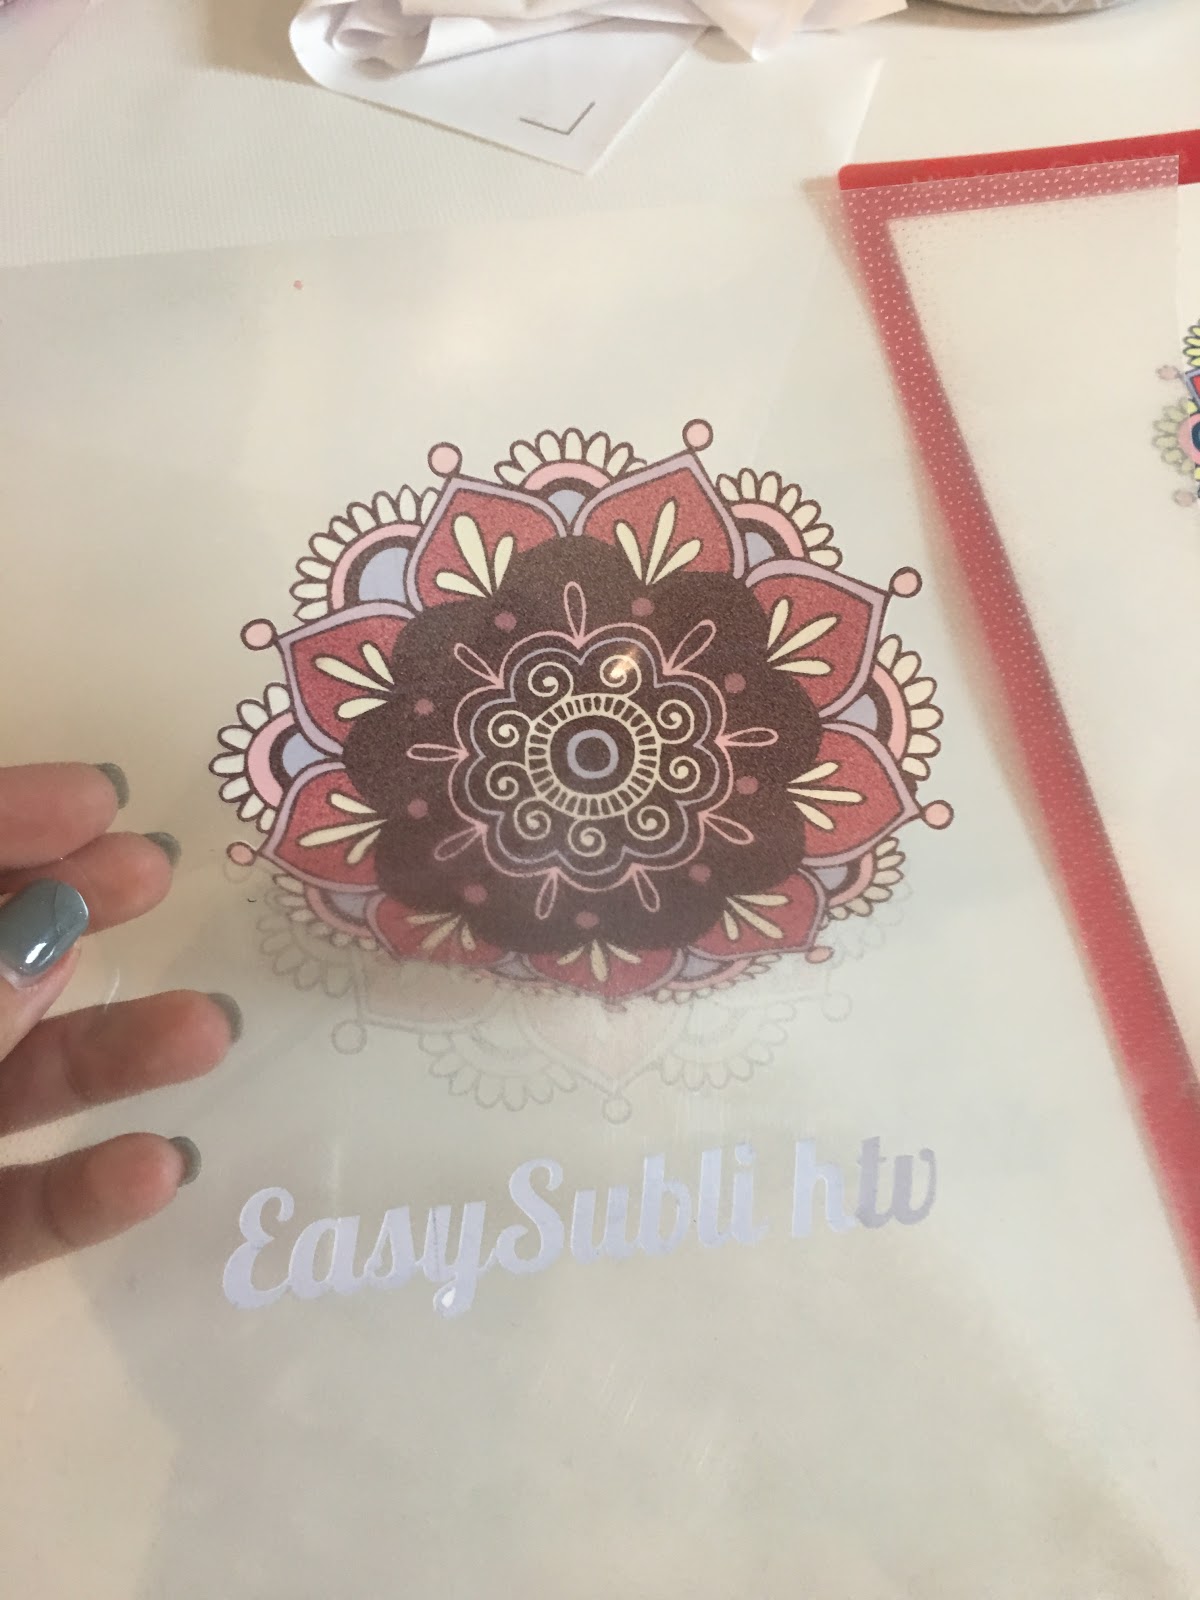 SISER EASYSUBLI HTV: EVERYTHING YOU WANT TO KNOW ABOUT SUBLIMATION